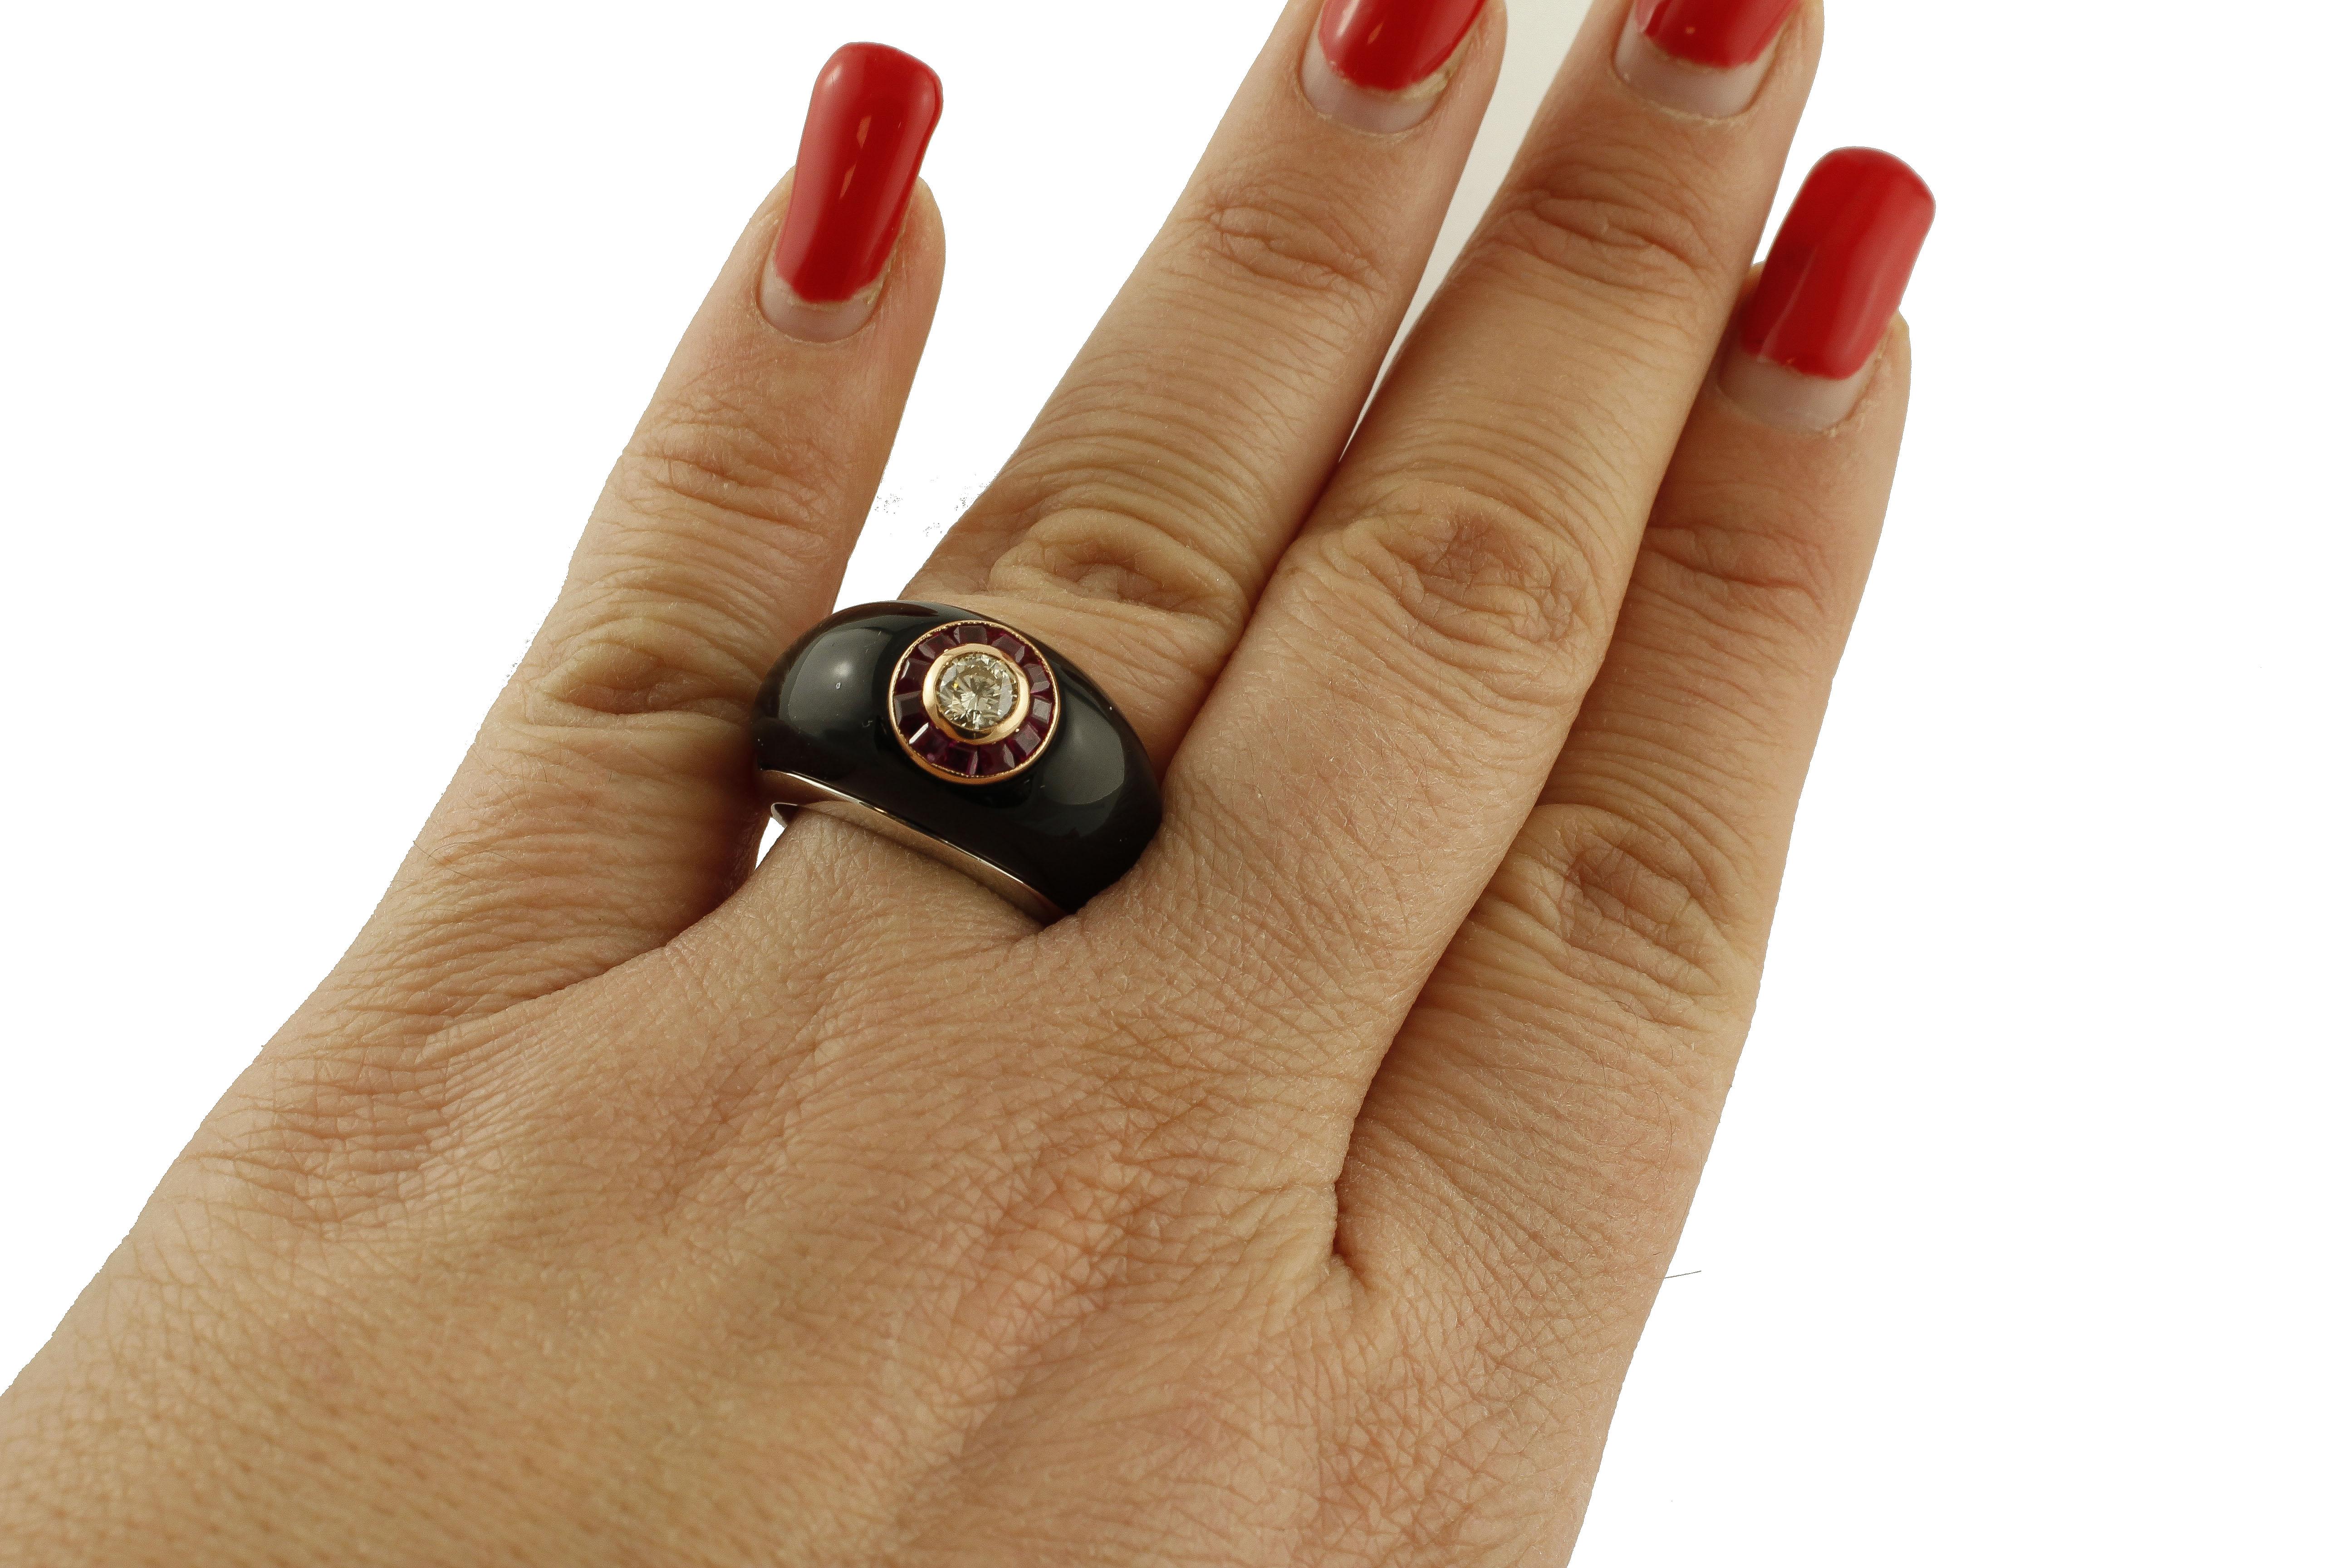 Central Diamond, Rubies, Onyx, 18 Karat White and Rose Gold Ring 1